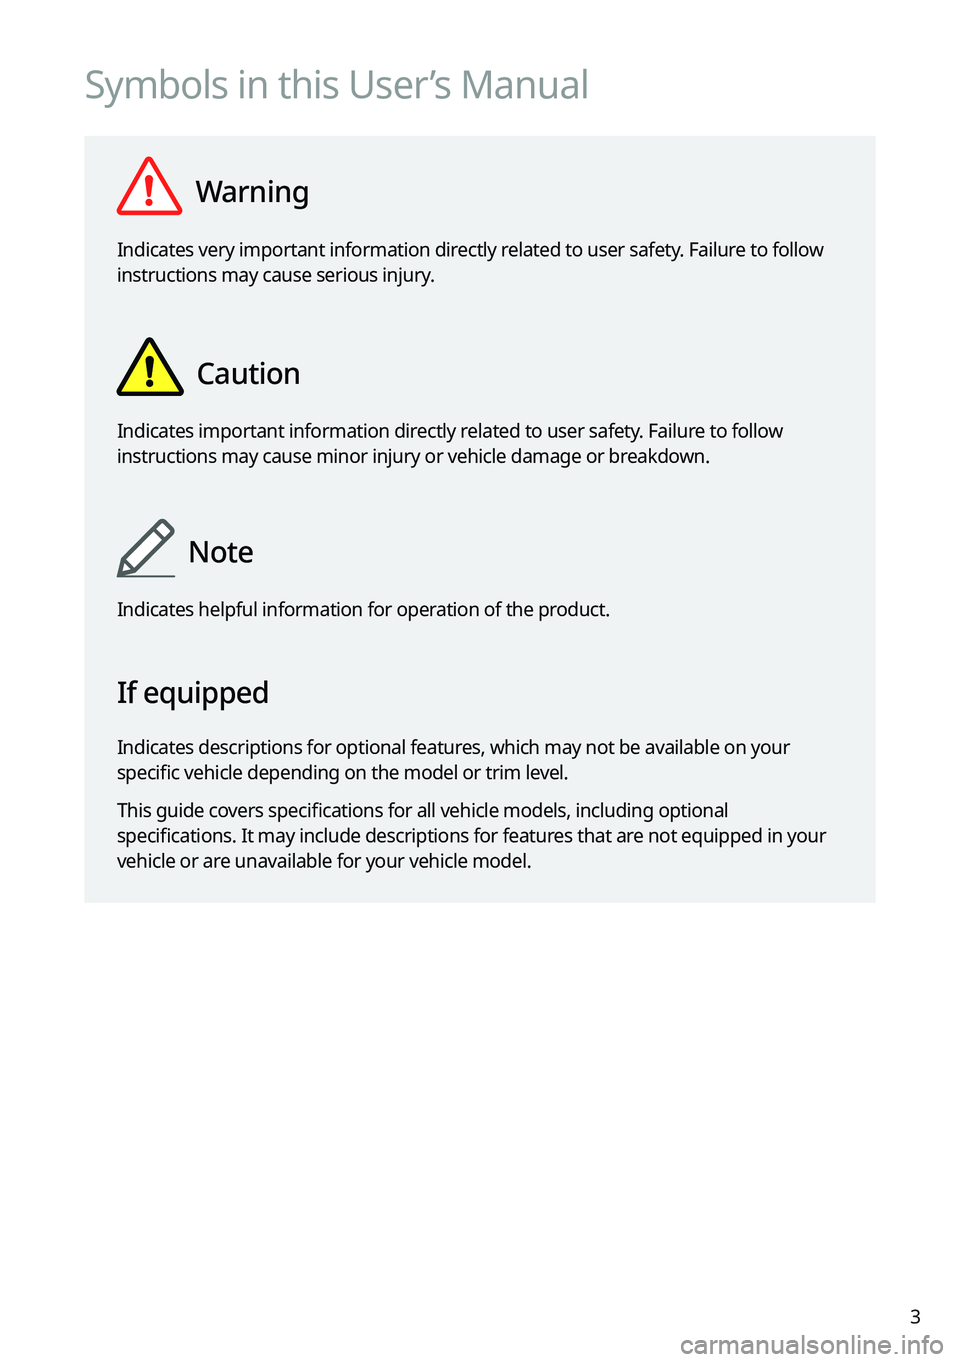 KIA NIRO 2021  Navigation System Quick Reference Guide 3
Symbols in this User’s Manual
  Warning
Indicates very important information directly related to user safety. Failure to follow 
instructions may cause serious injury.
  Caution
Indicates importan